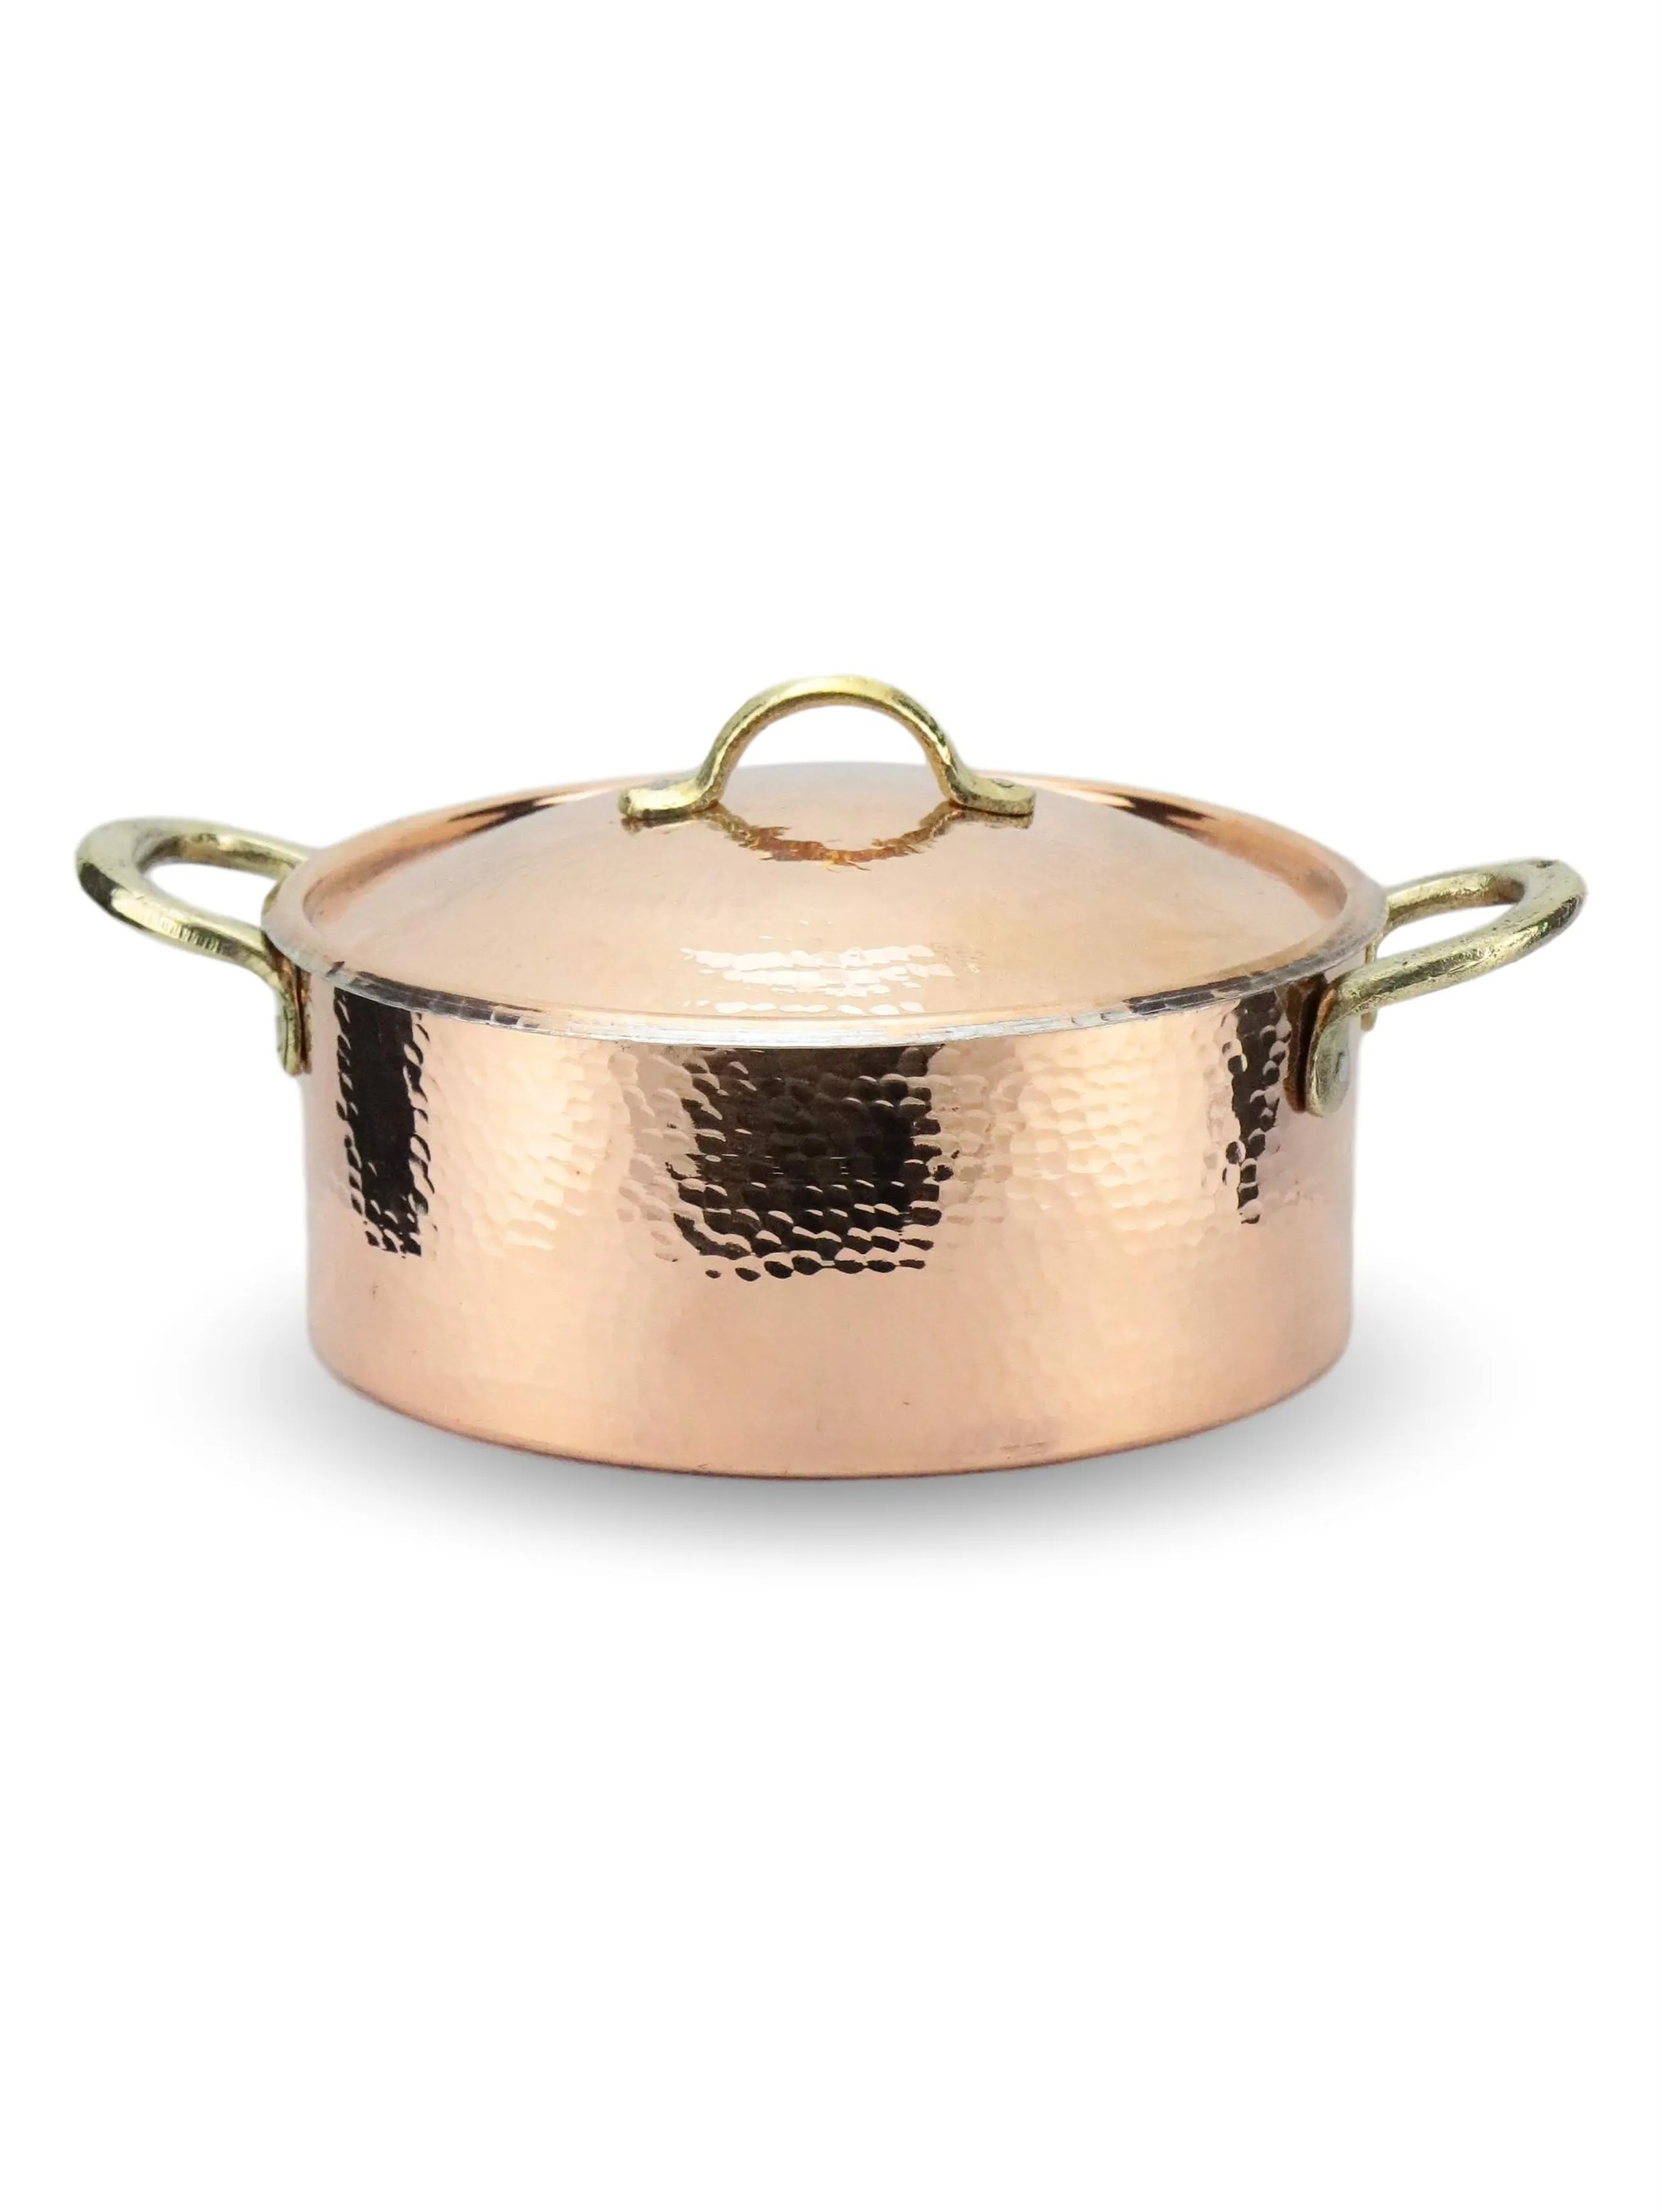 

SONAYCOPPER 1.2mm Thick Hammered Copper Soup Pot Stew Pan Casserole, 2.1 L